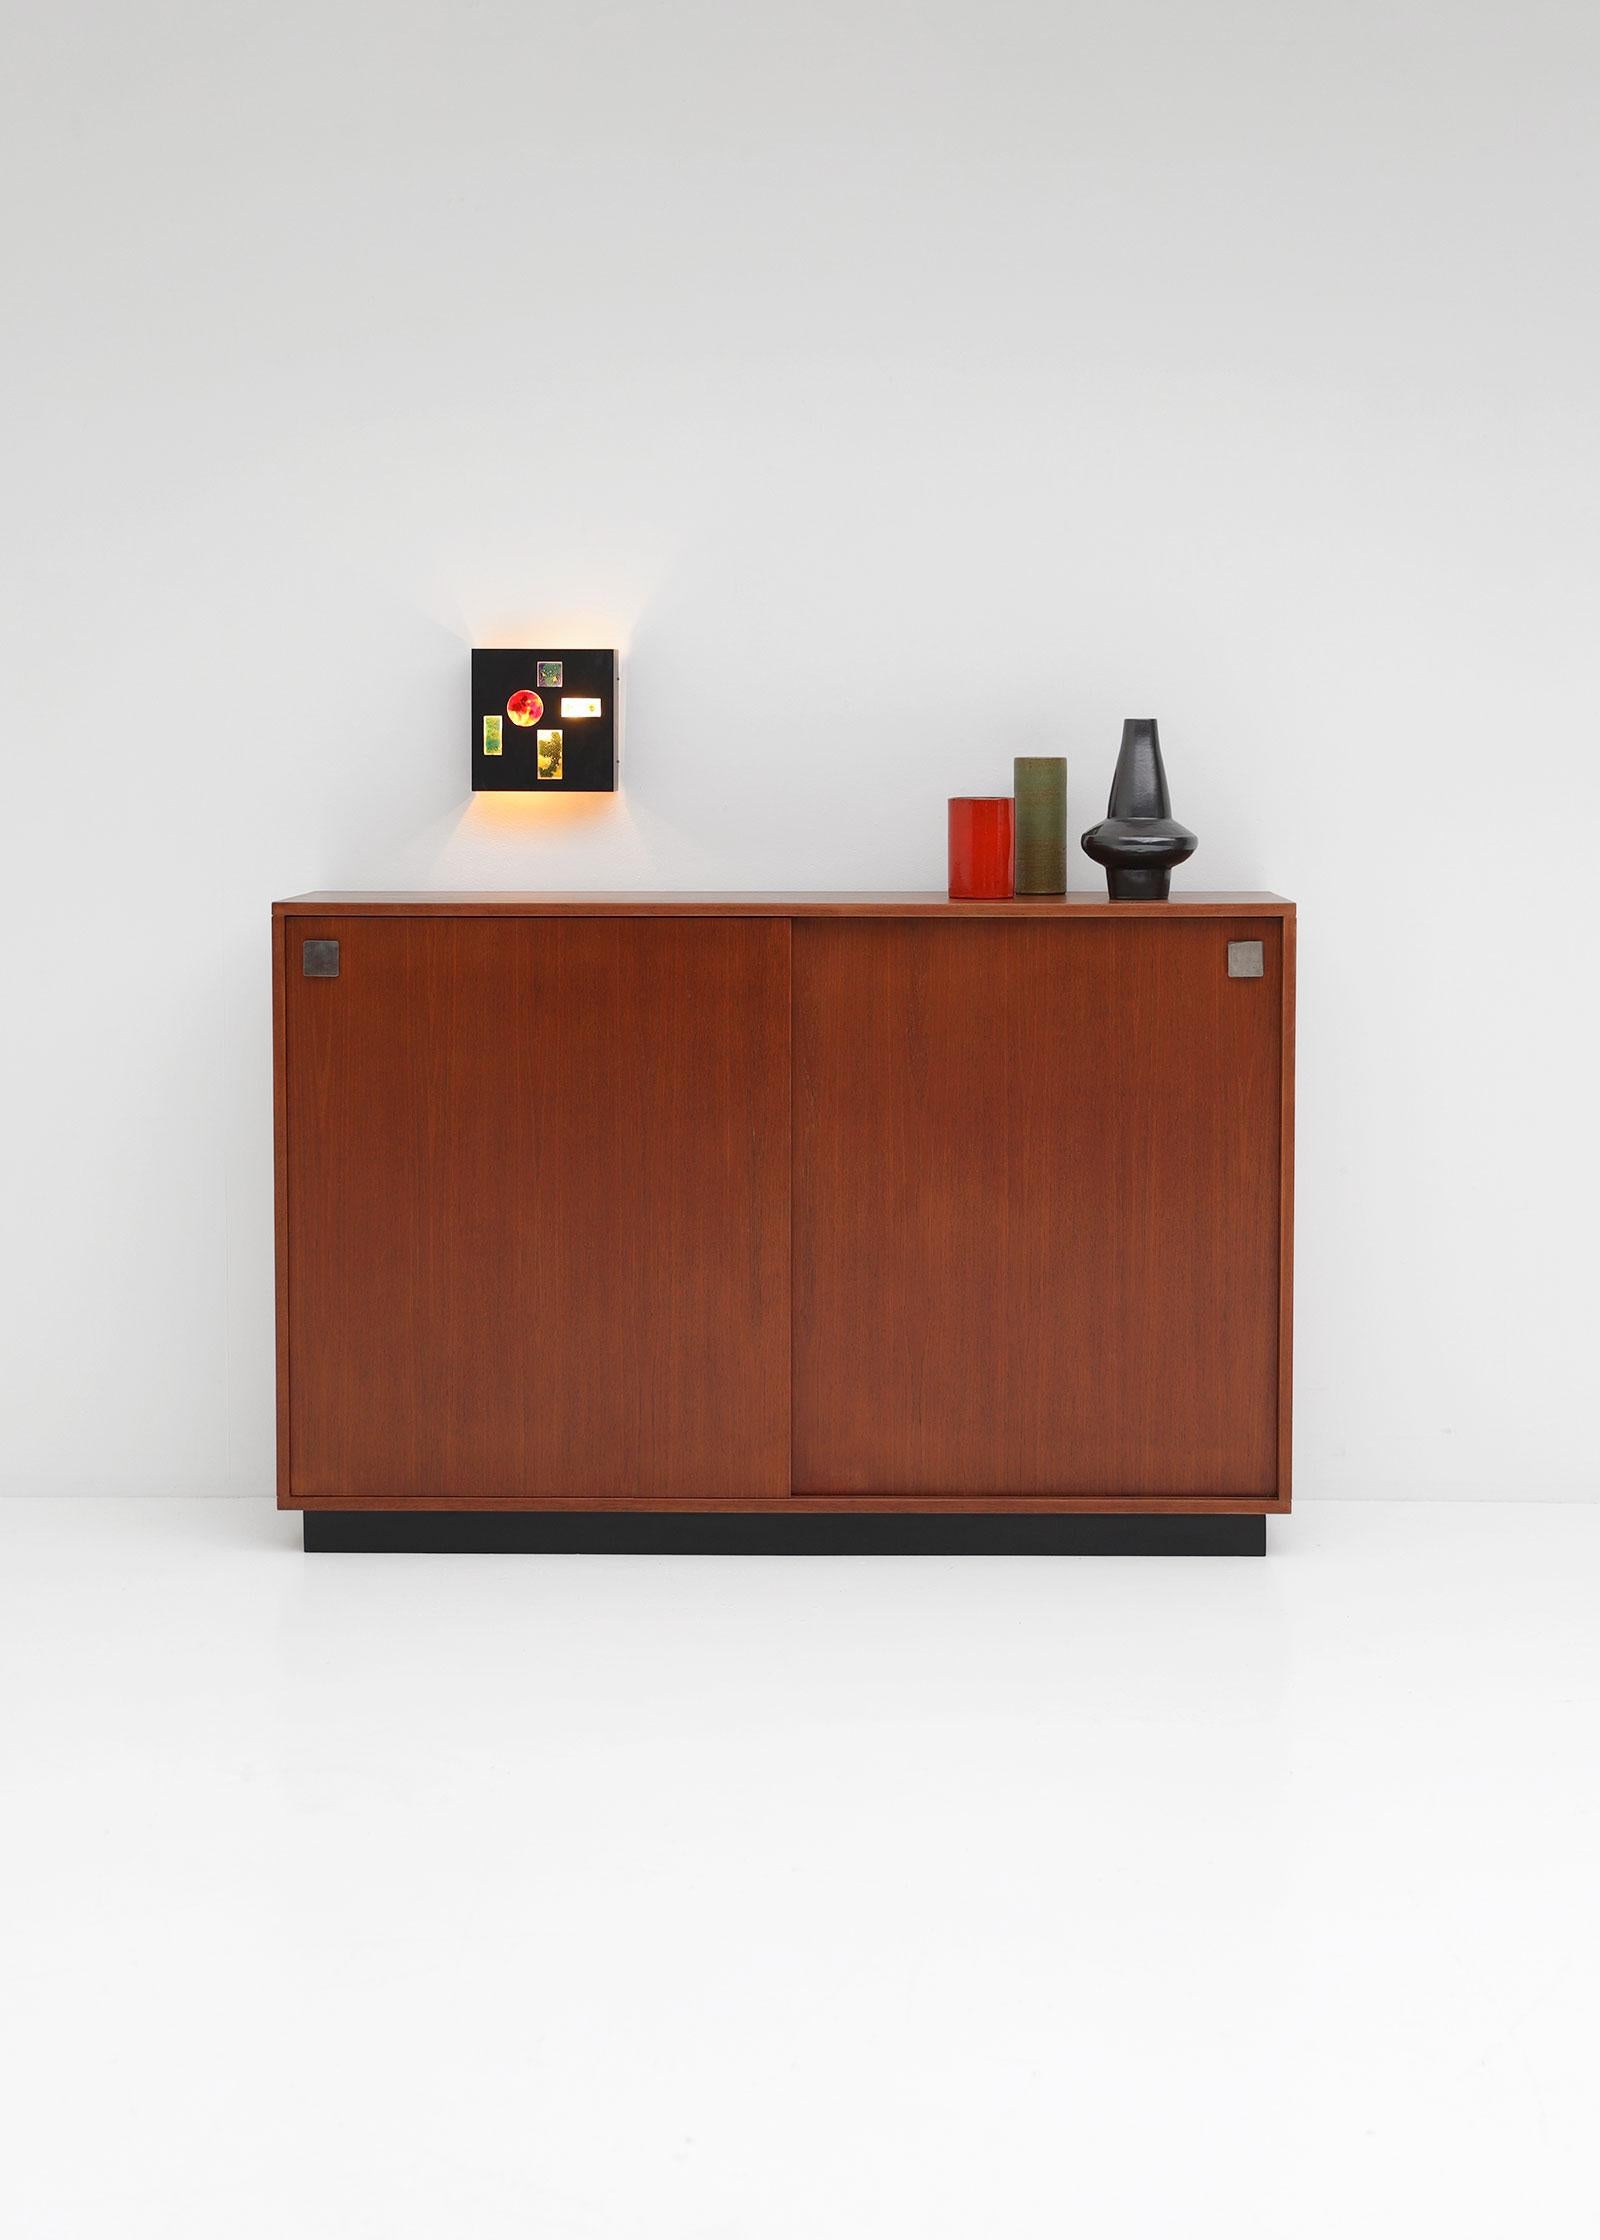 Alfred Hendrickx, Mid-Century Modern, teak, Belform, Belgium, 1960s

This cabinet was designed by Alfred Hendrickx for Belform in the 1960s. It has two sliding doors and offers a lot of storage space due the shelves inside. The cabinet is fully